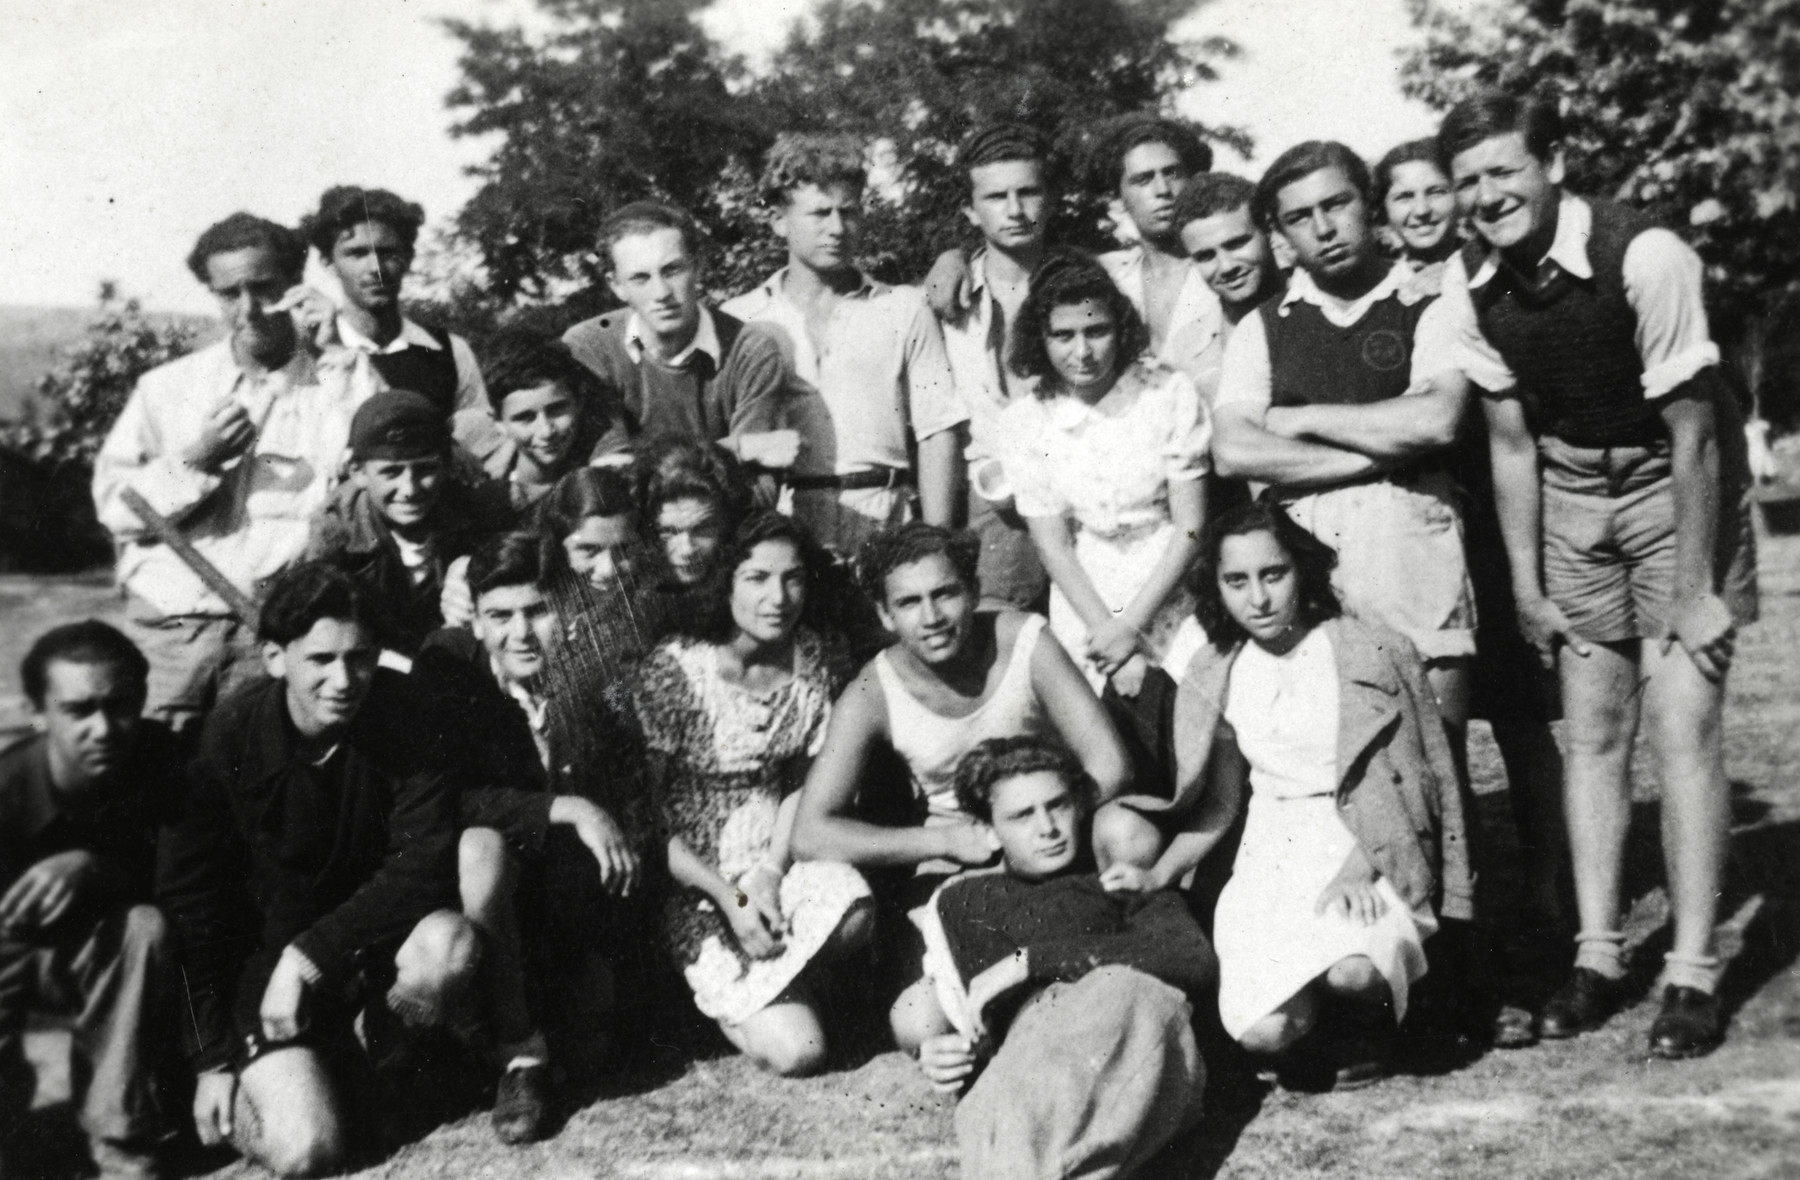 Group portrait of members of the Betar Zionist youth group in a summer camp near Sofia.

Joseph is pictured third from the left in the front row.